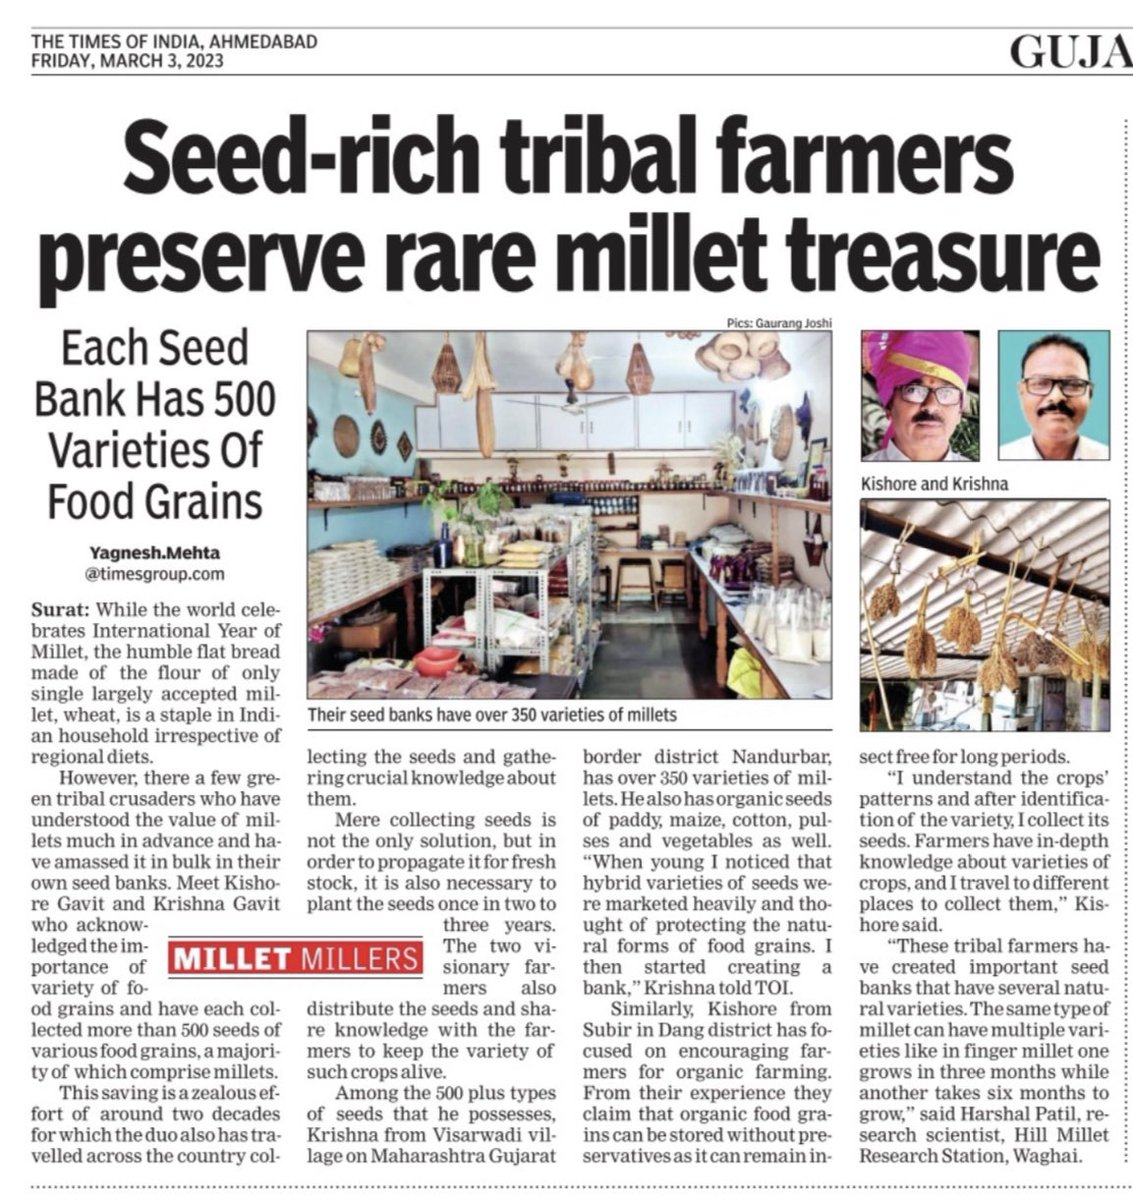 #Visionary #Bankers of a different kind

#TOIExclusive #tribal #dang #organic #farming #agriculture #seedbank #millets
⁦@anilgb⁩